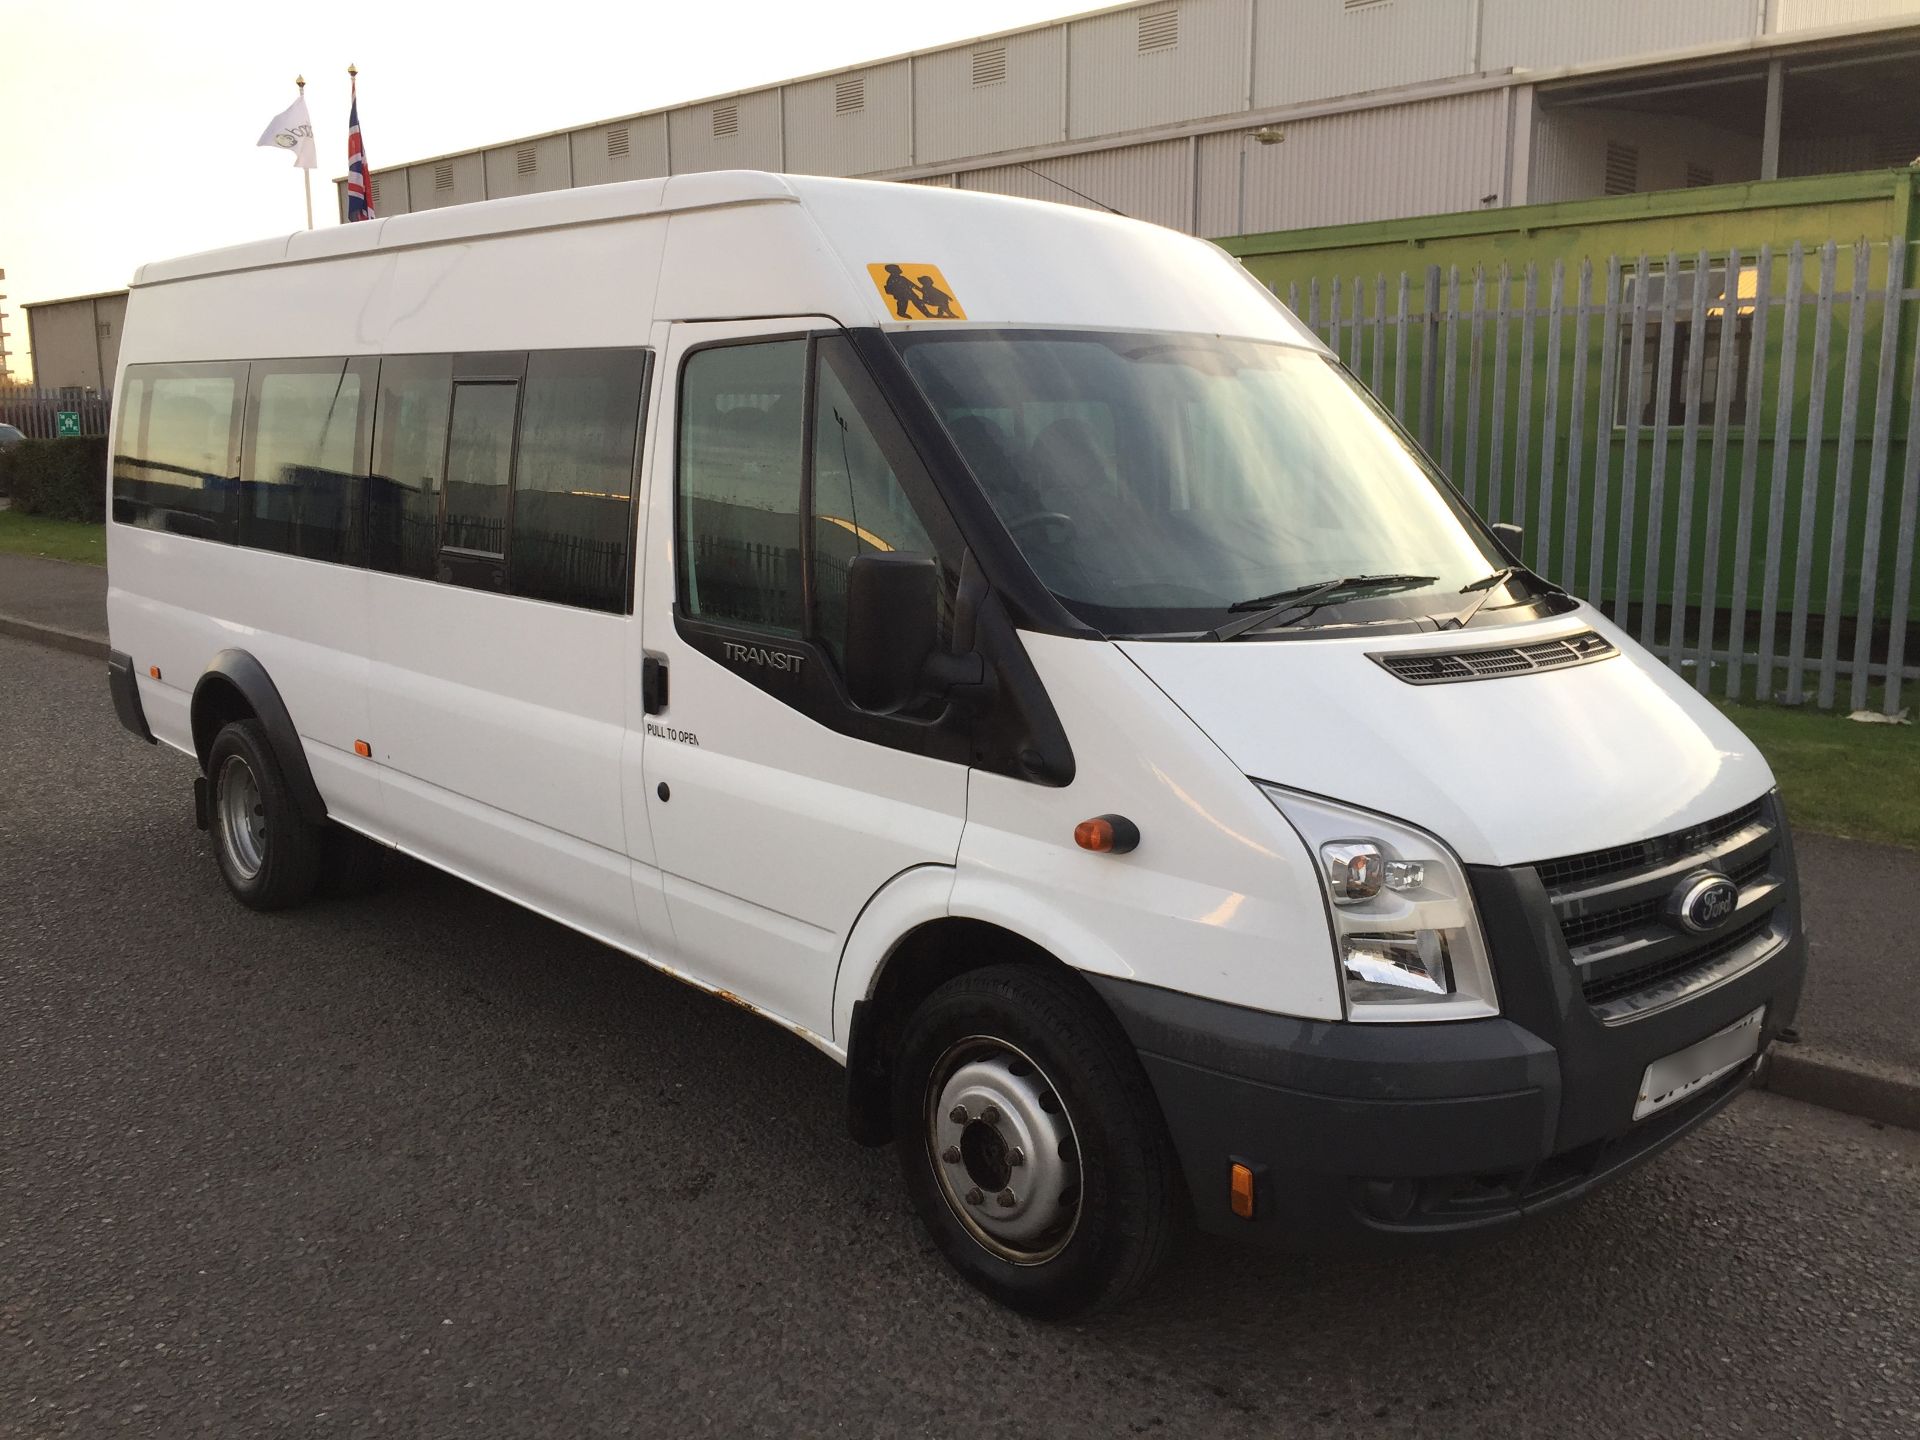 2010 Ford Transit 430 EL 17 Seater Minibus C.O.I.F 135 PS 2.4 - CL505 - Location: Corby,